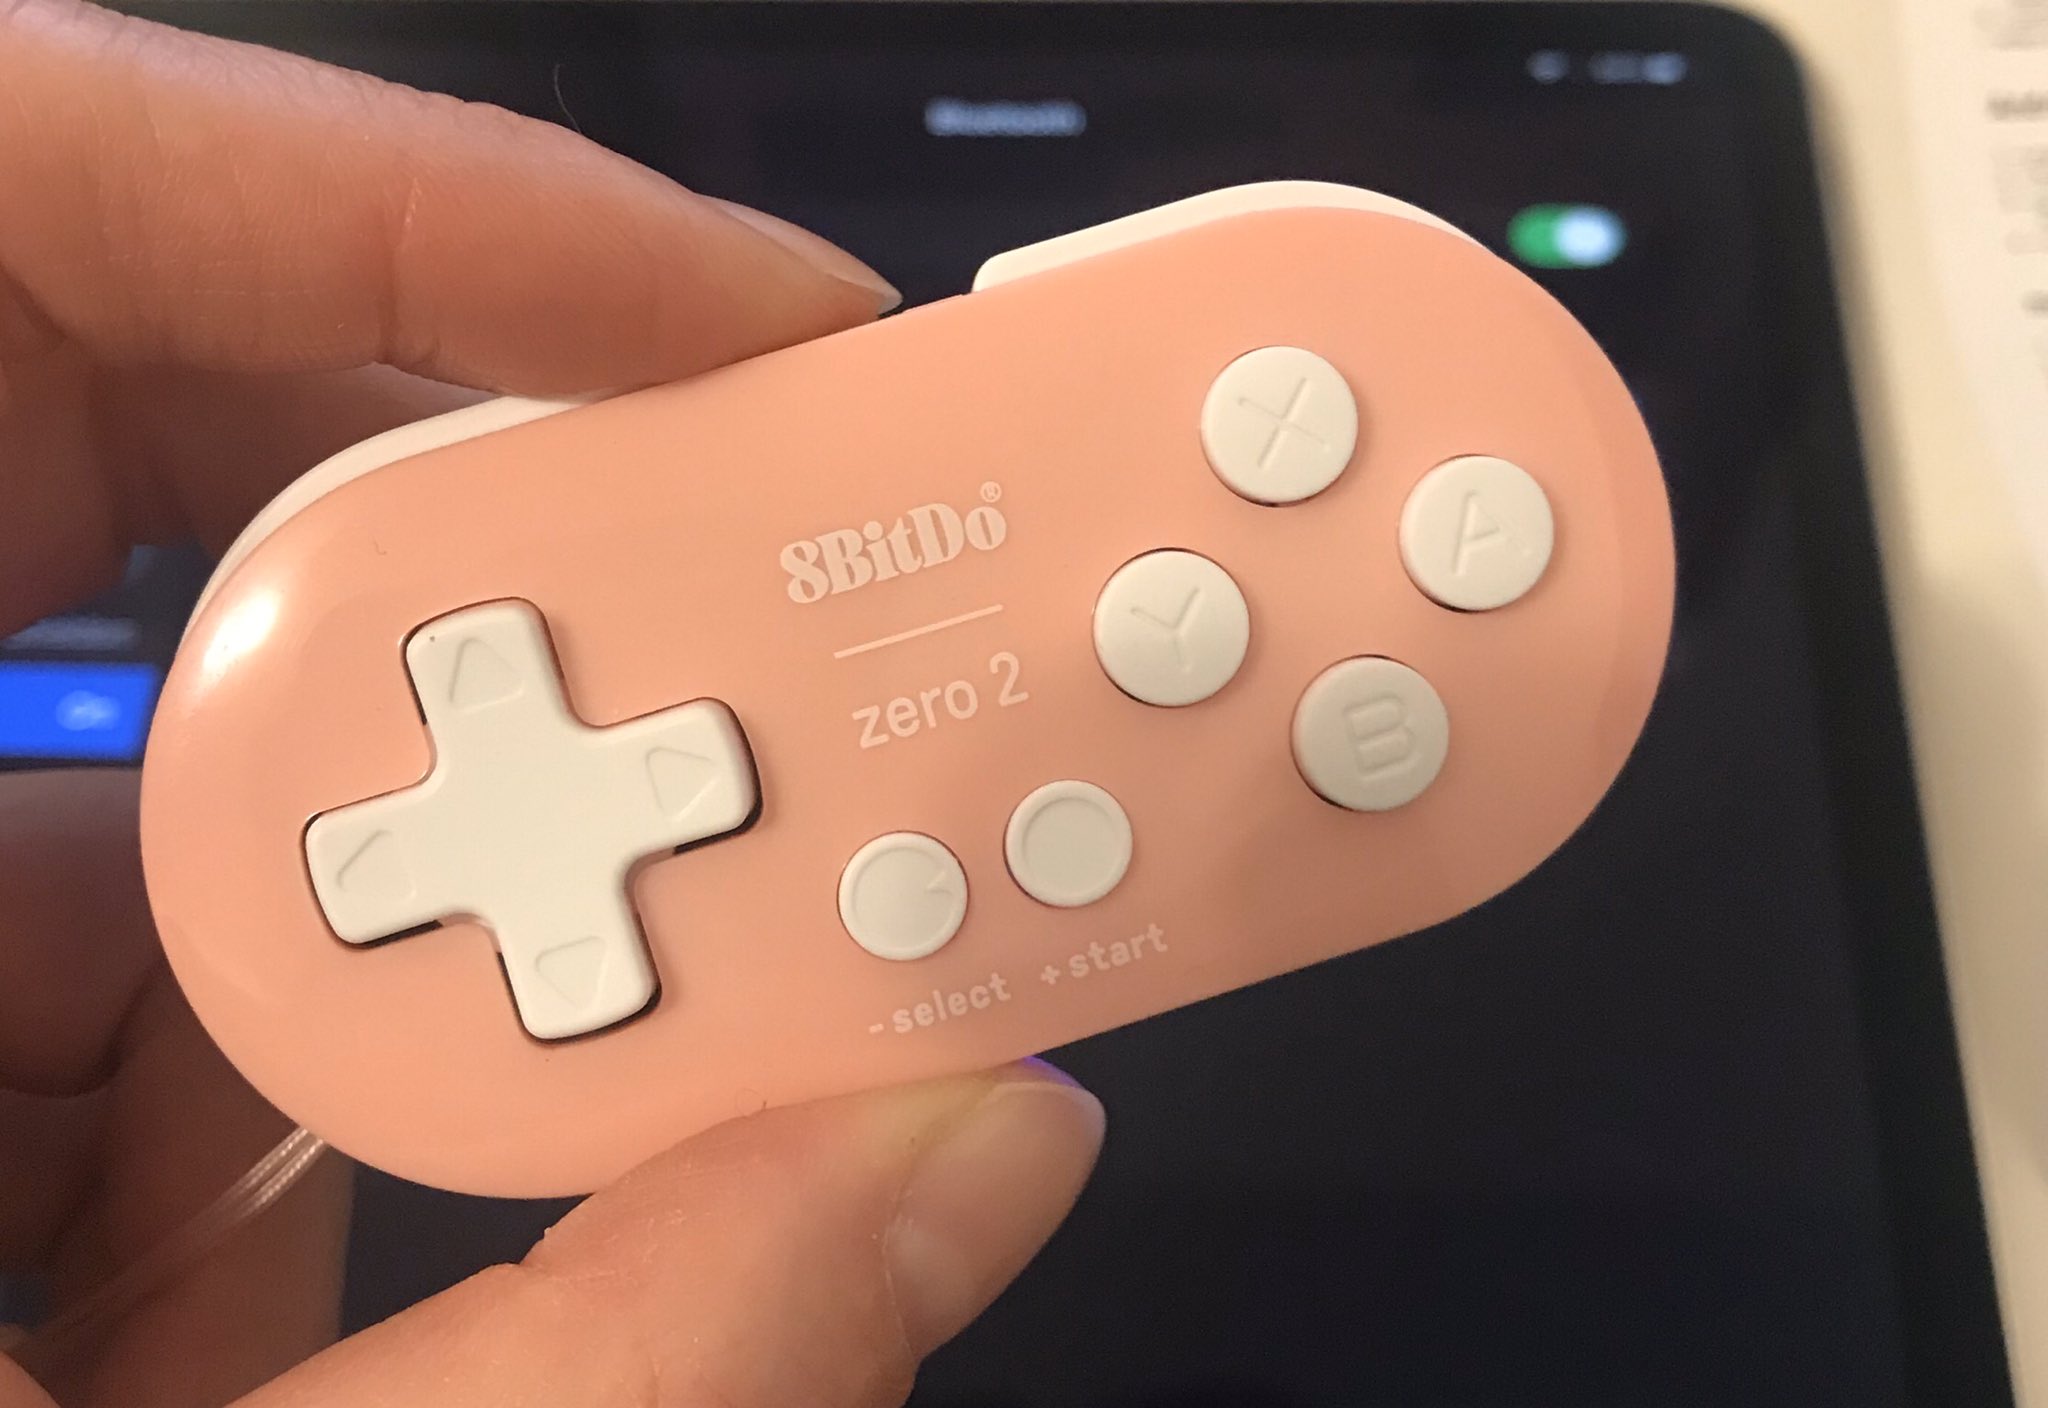 Koh Vtuber Update Got The 8bitdo Zero2 To See If It Works The Same Amp It S Follow The Instructions For Keyboard Mode Pairing Start R Then Hold Select Until